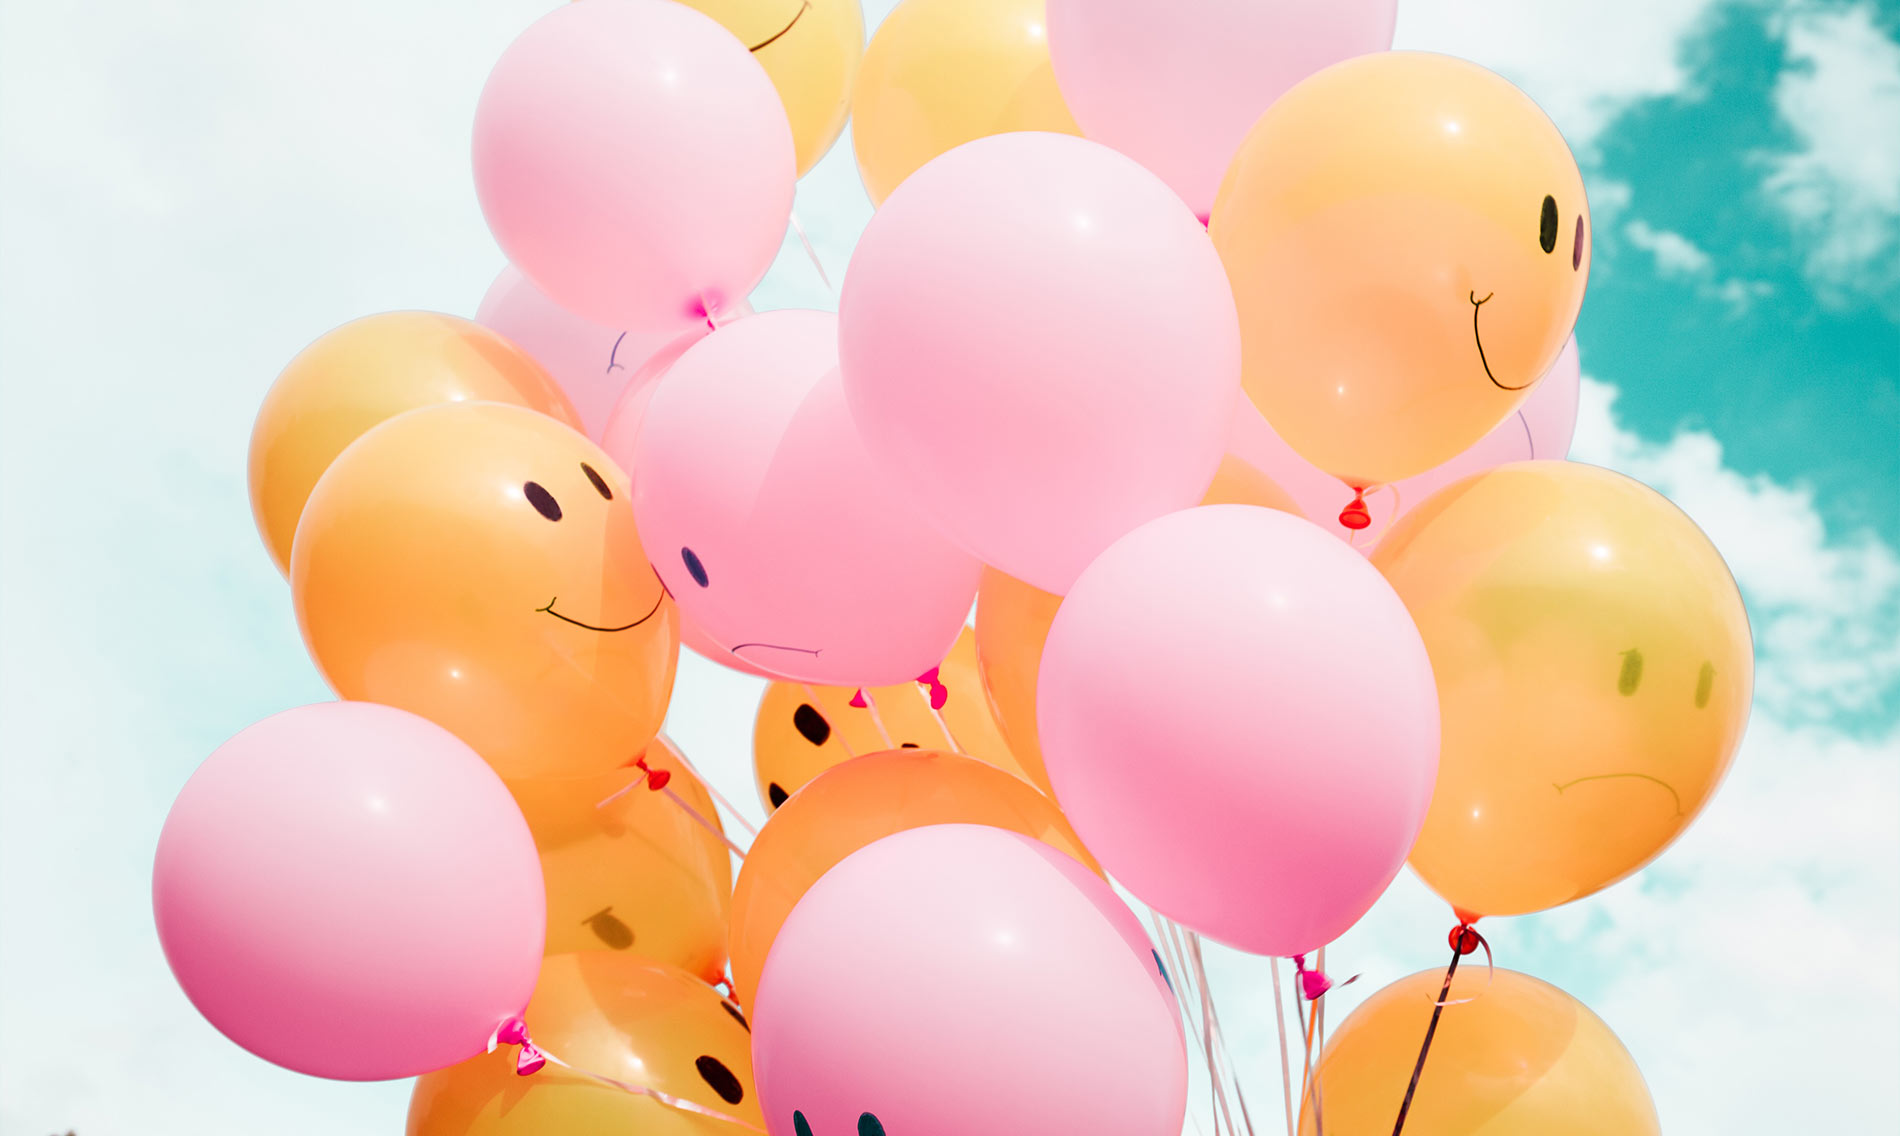 A photograph of a floating bunch of pink and orange balloons, some with happy faces on them and some with sad faces